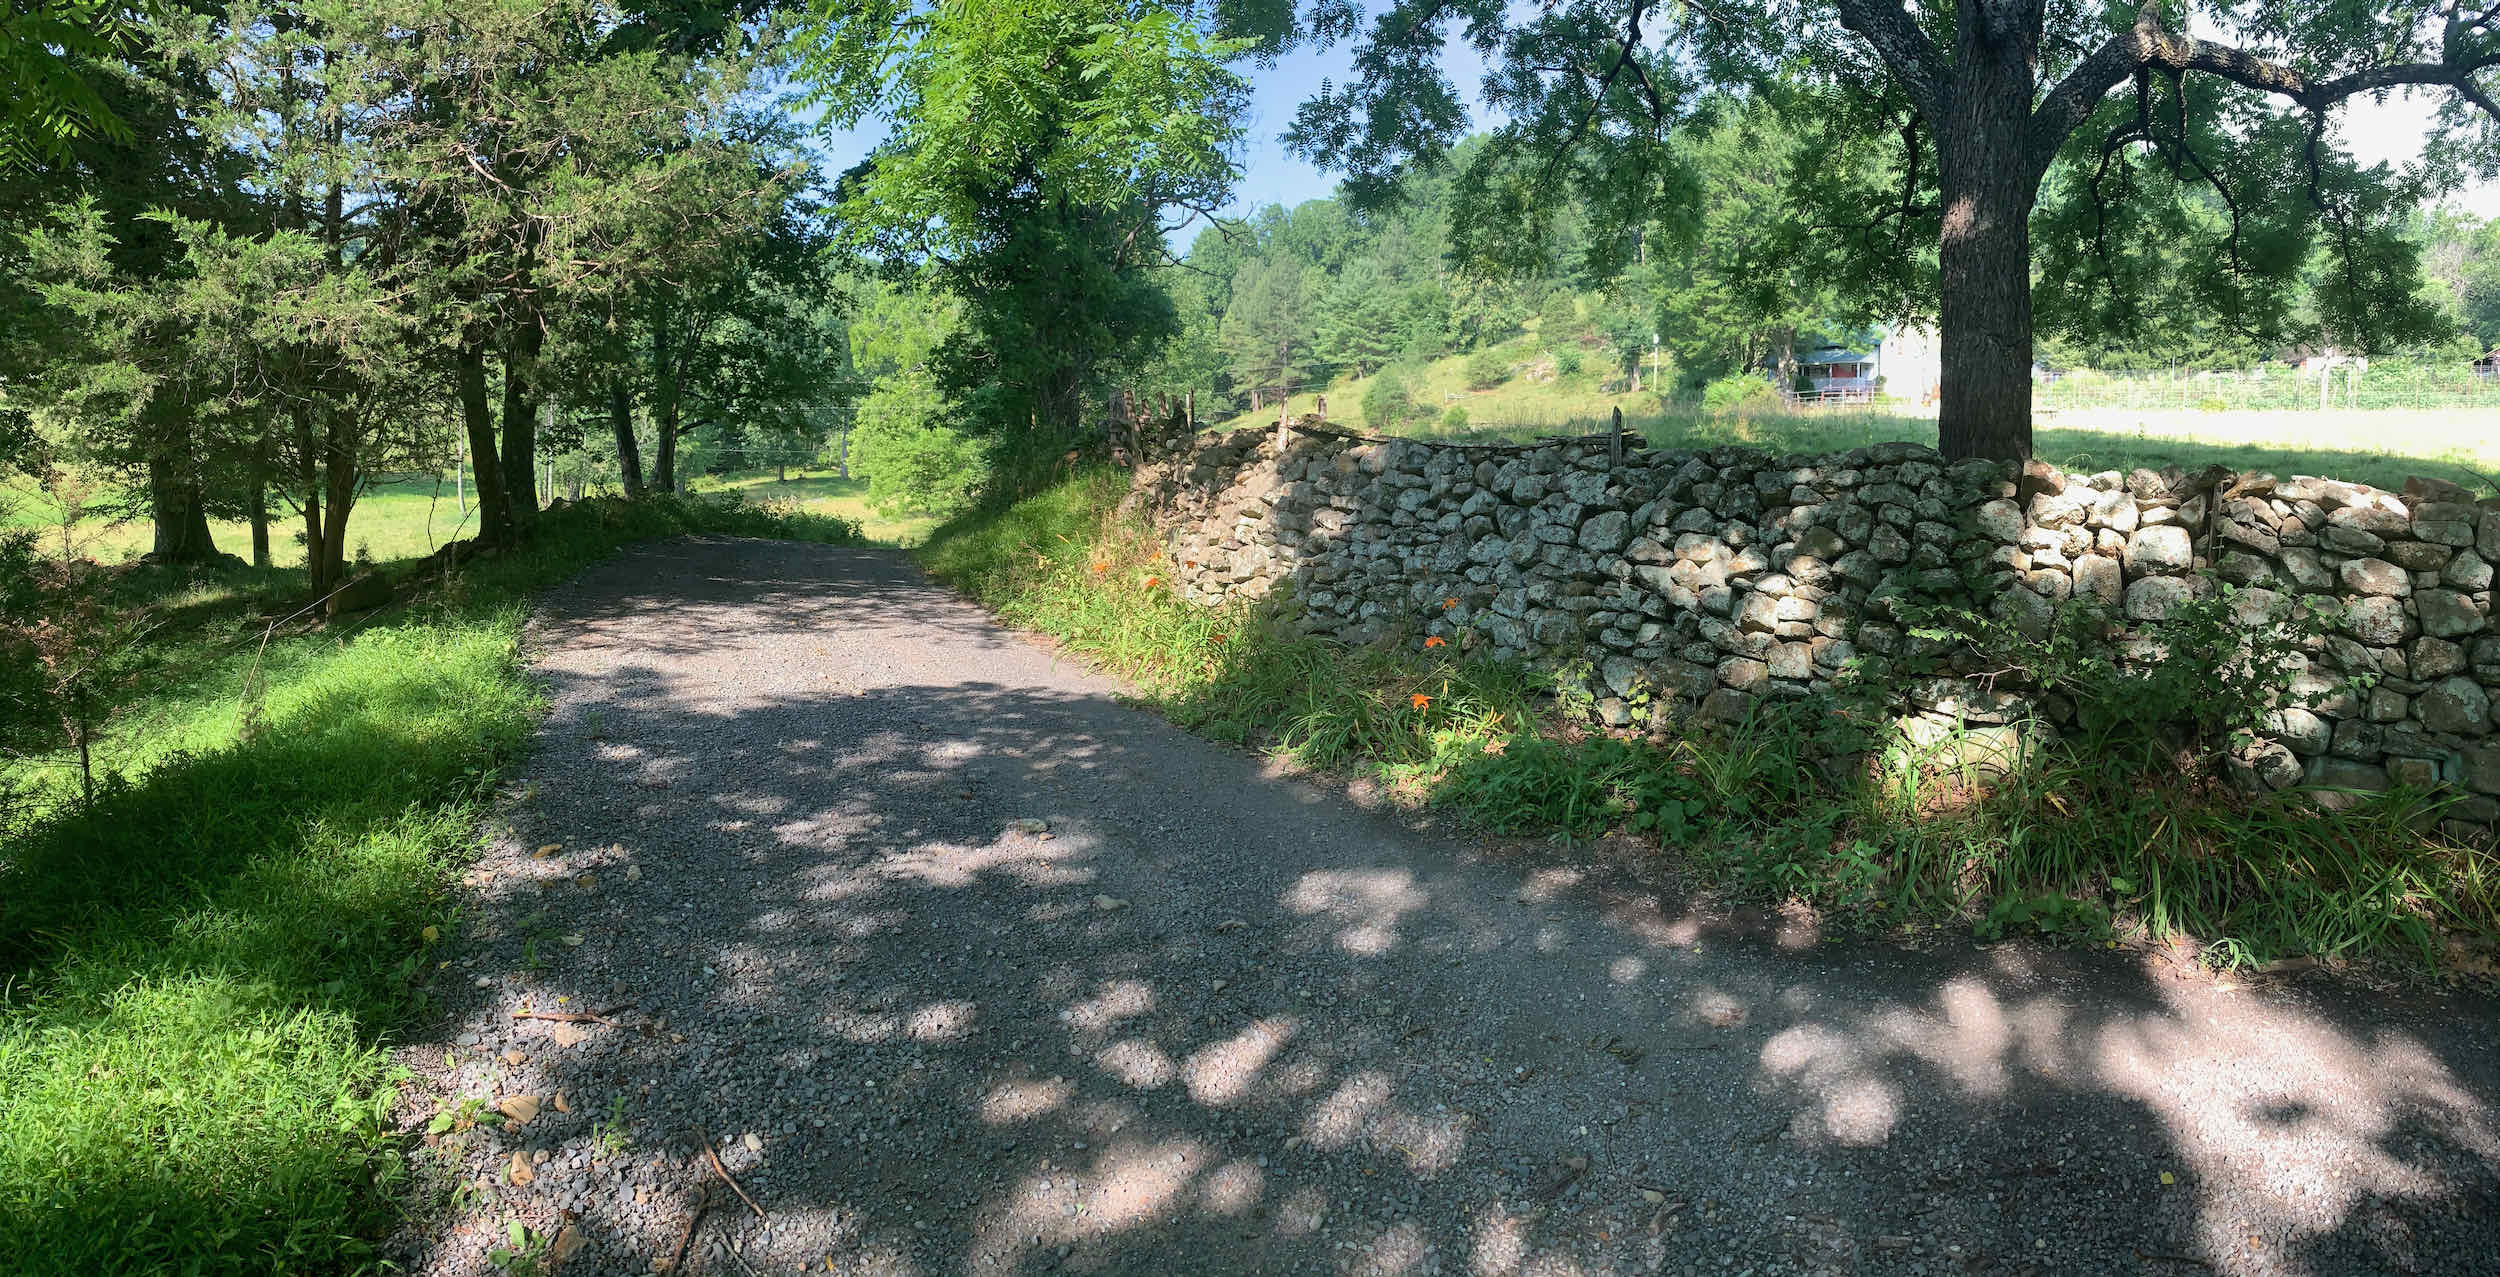 Passing old homesteads and stone walls along Rolling Road